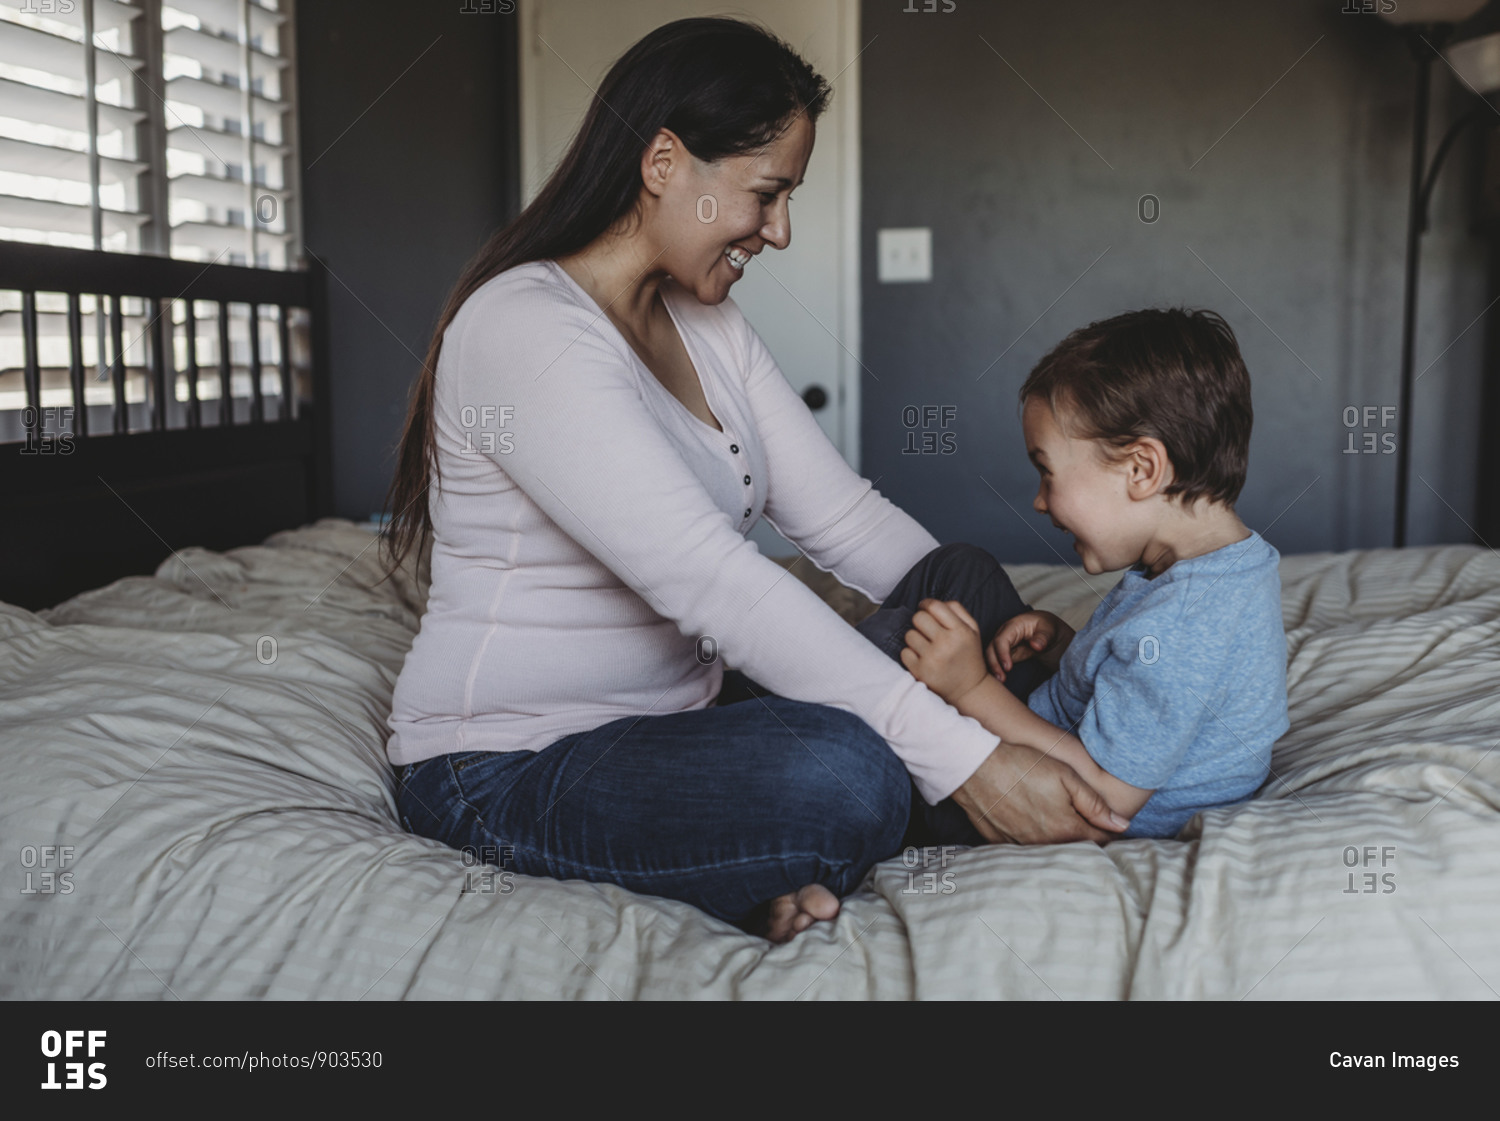 Laughing mid-30s mom tickling 5 yr old son on bed near window